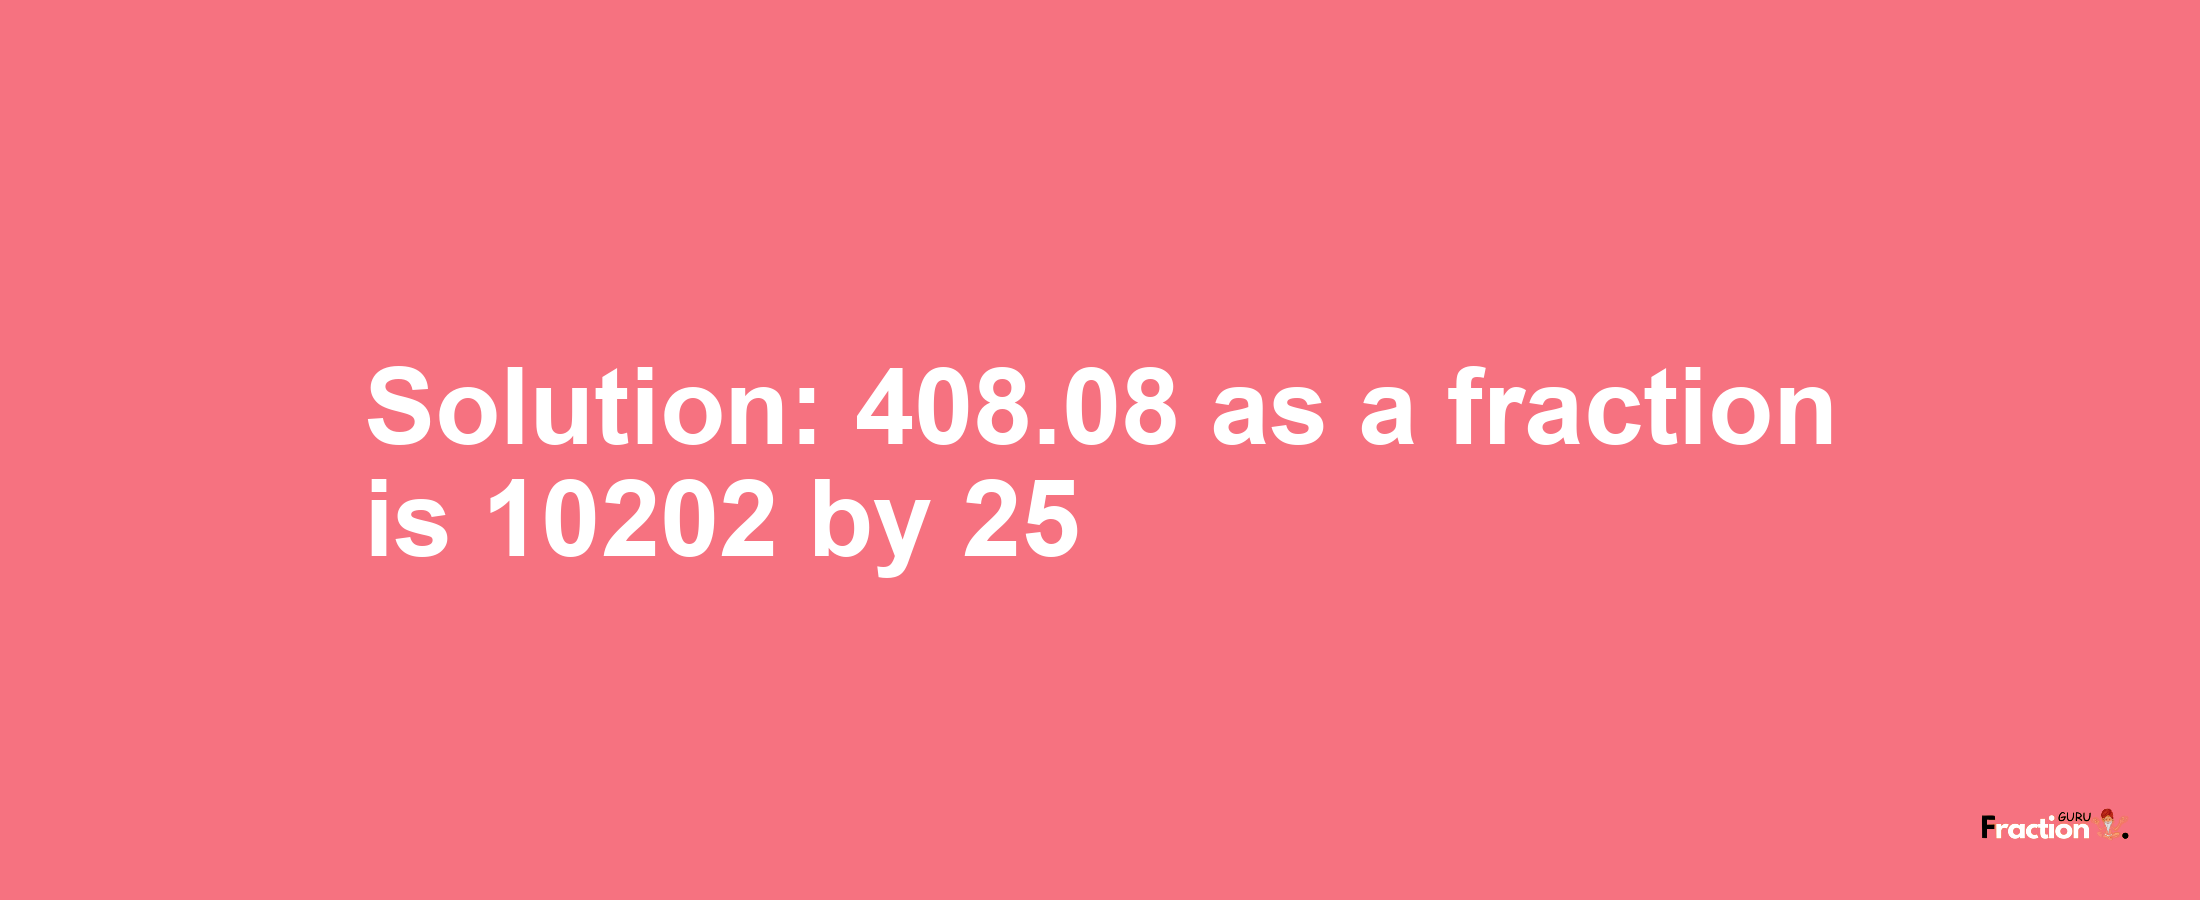 Solution:408.08 as a fraction is 10202/25